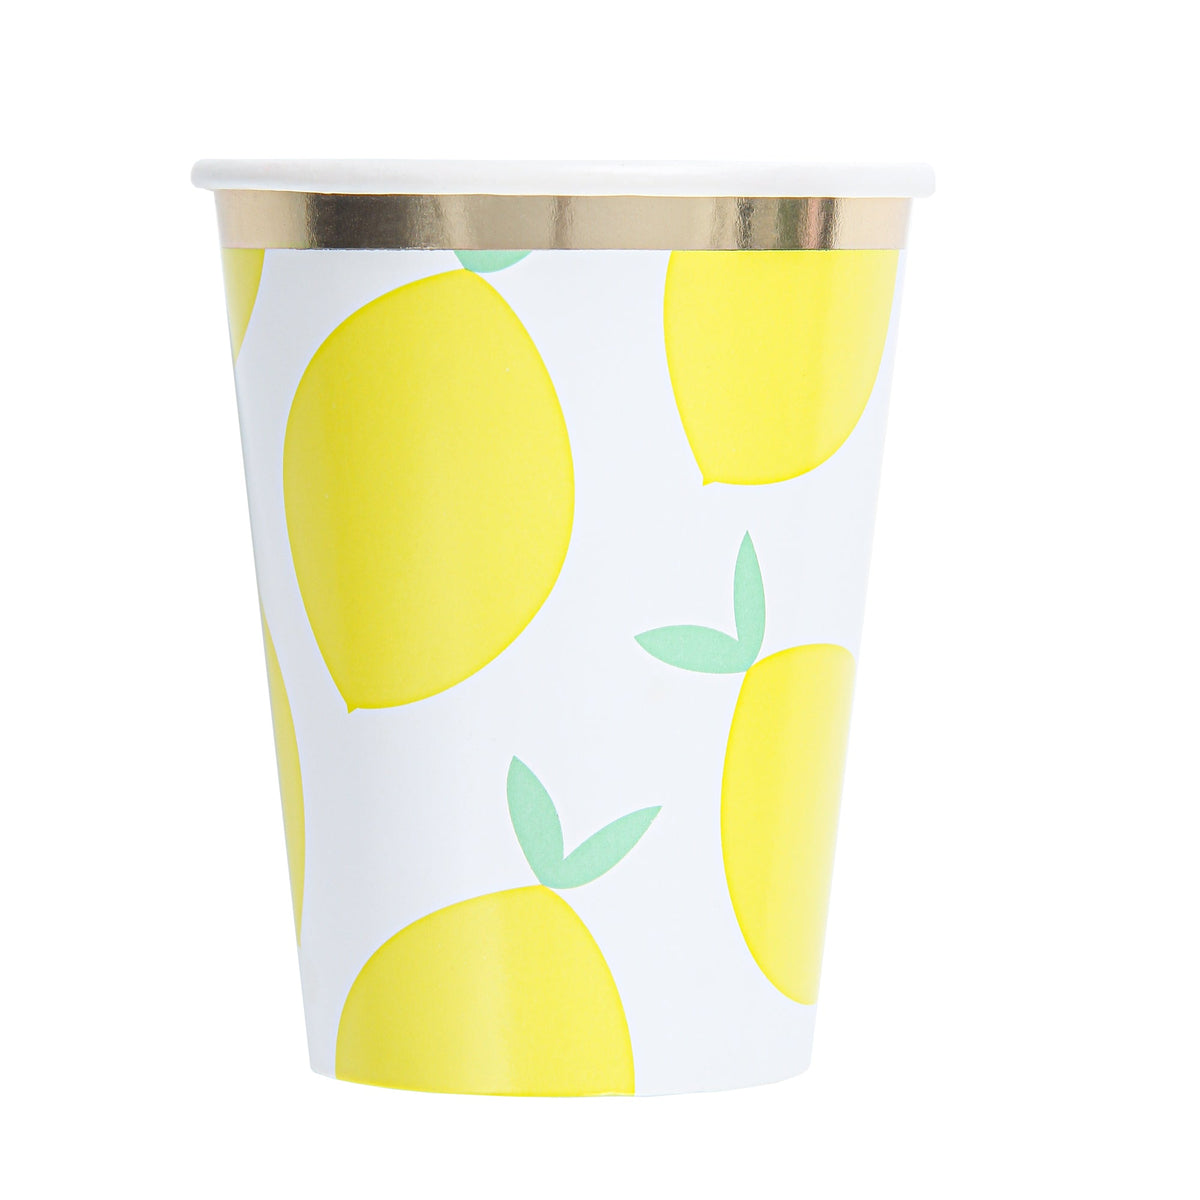 YIWU SANDY PAPER PRODUCTS CO., LTD Everyday Entertaining Lemoncello Paper Cups, 9 oz, 8 Count 810120712581